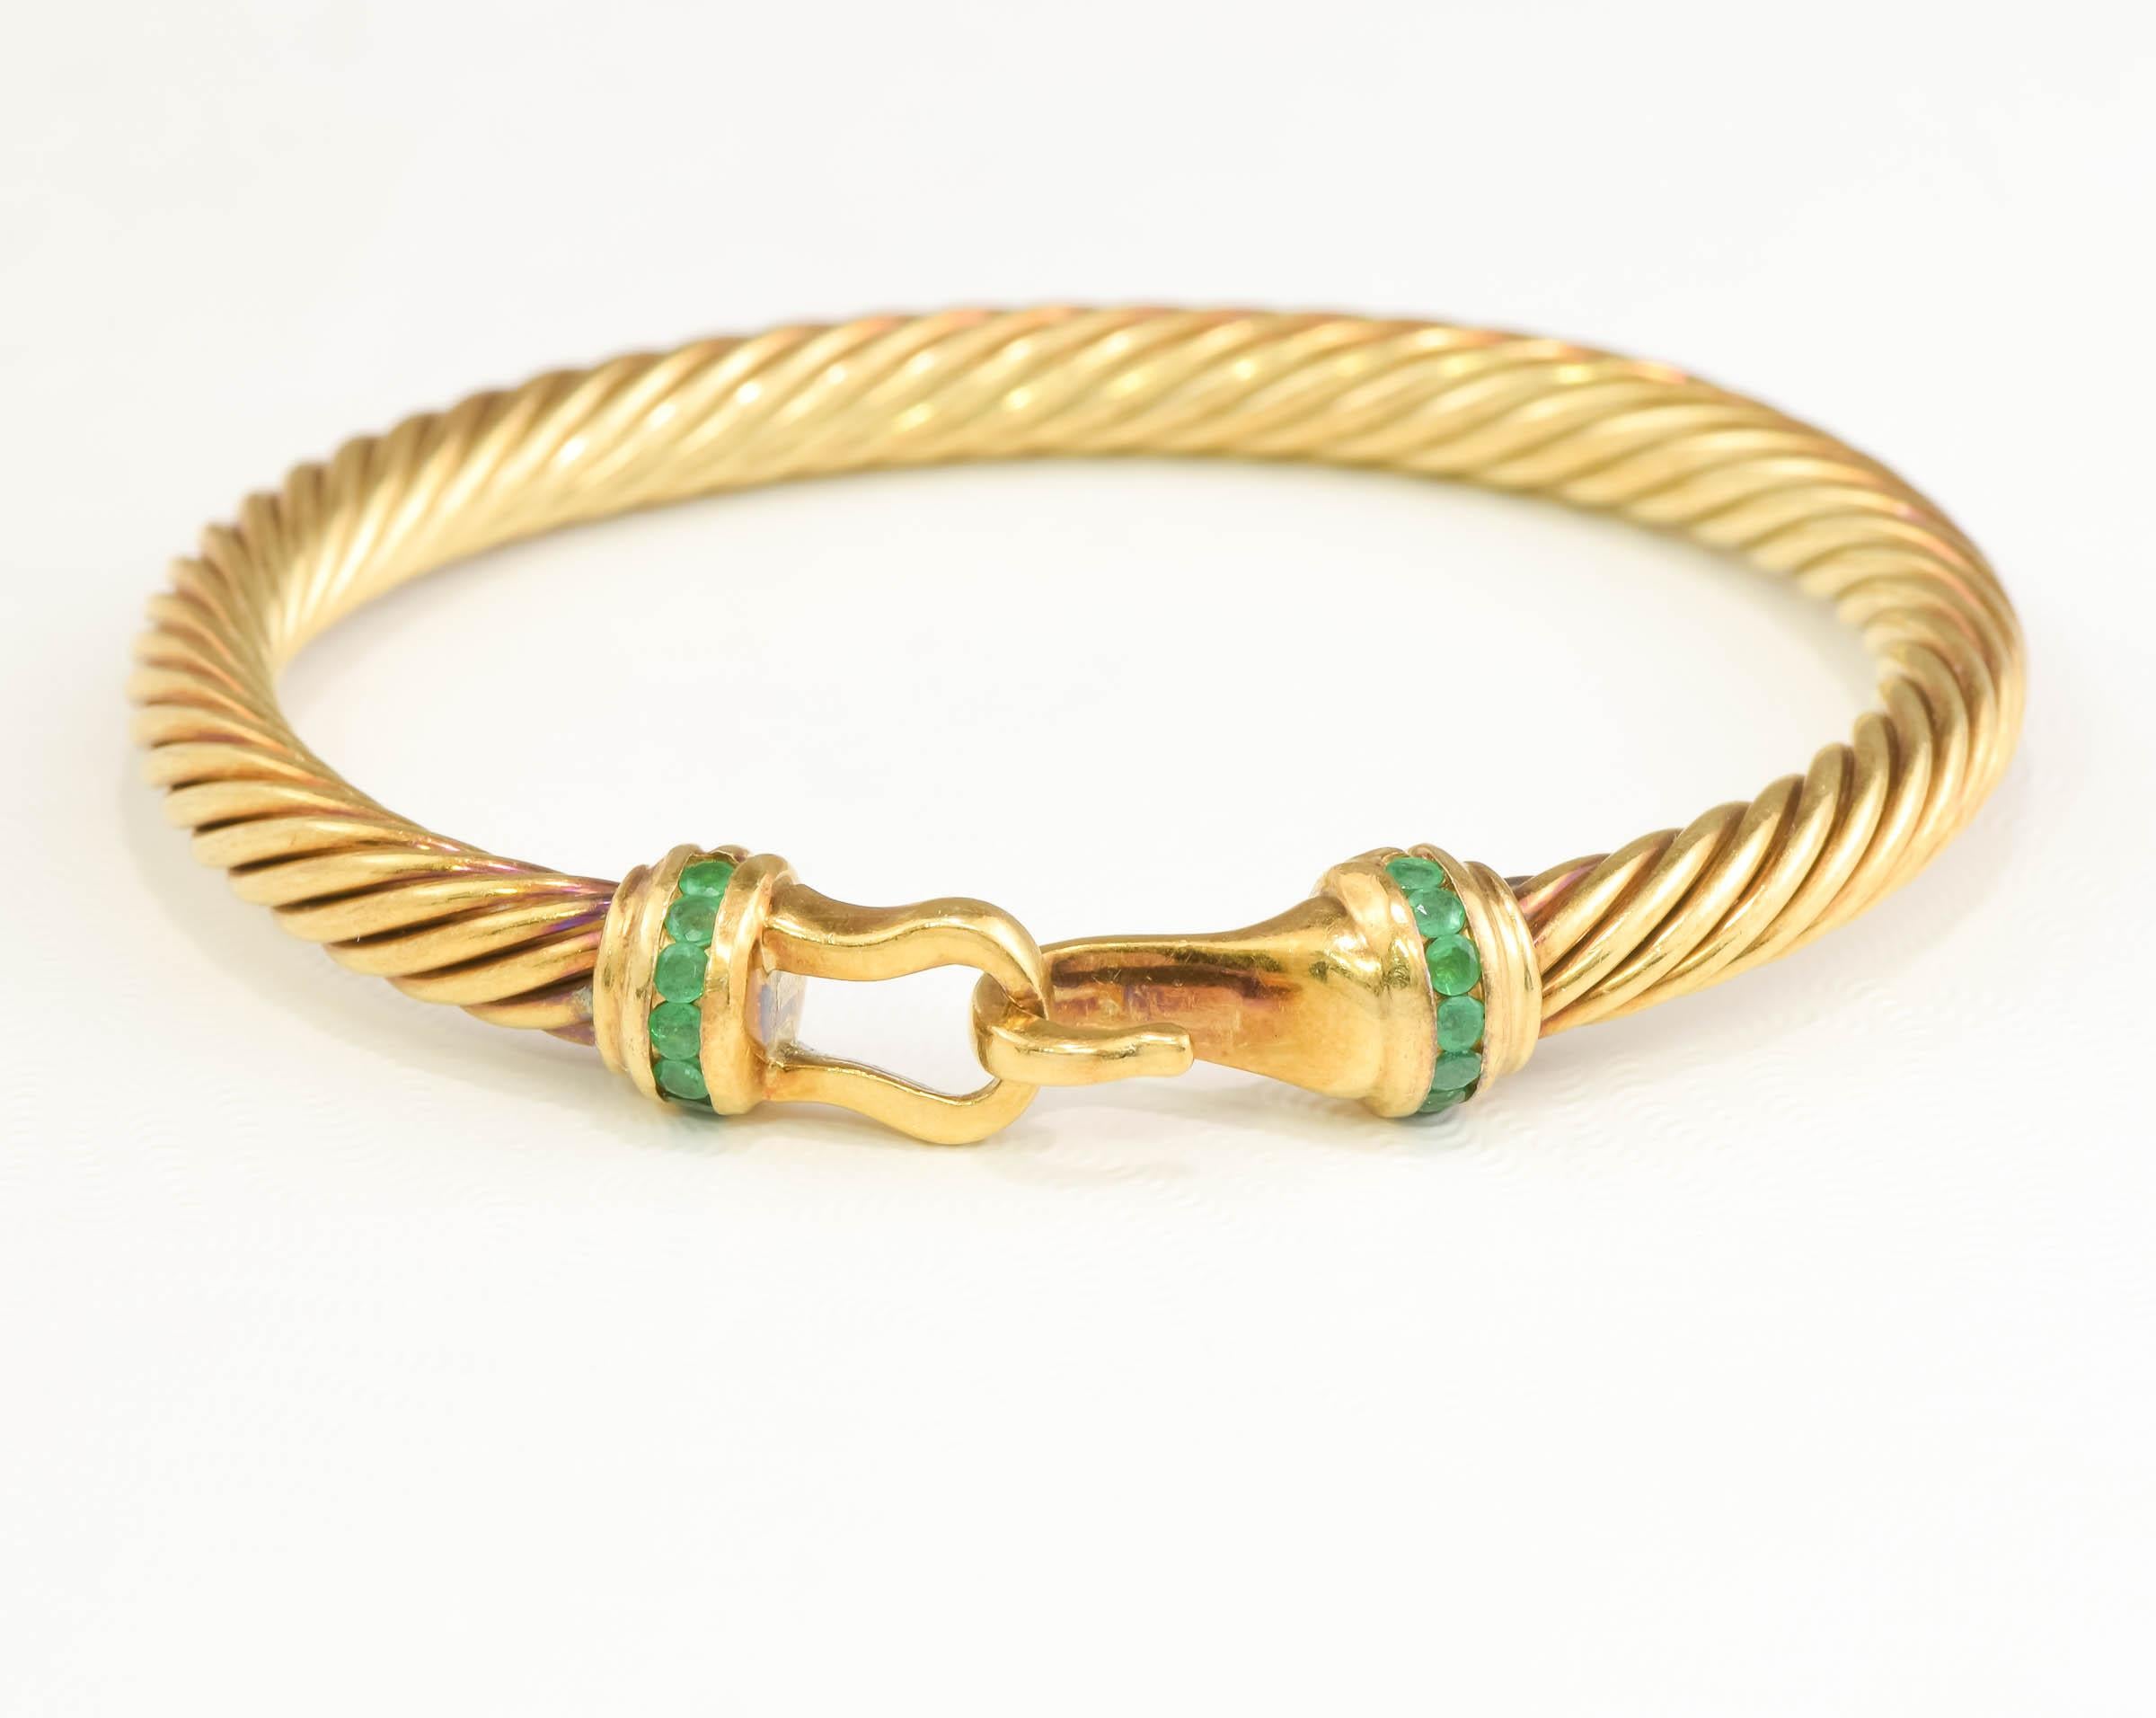 Offered is a lovely classic gold & emerald bangle bracelet by David Yurman, beautifully made for a small wrist.

Finely crafted of richly hued solid 14K yellow gold, the bracelet measures approximately 4.94 mm wide and weighs a hefty 16.82 grams on